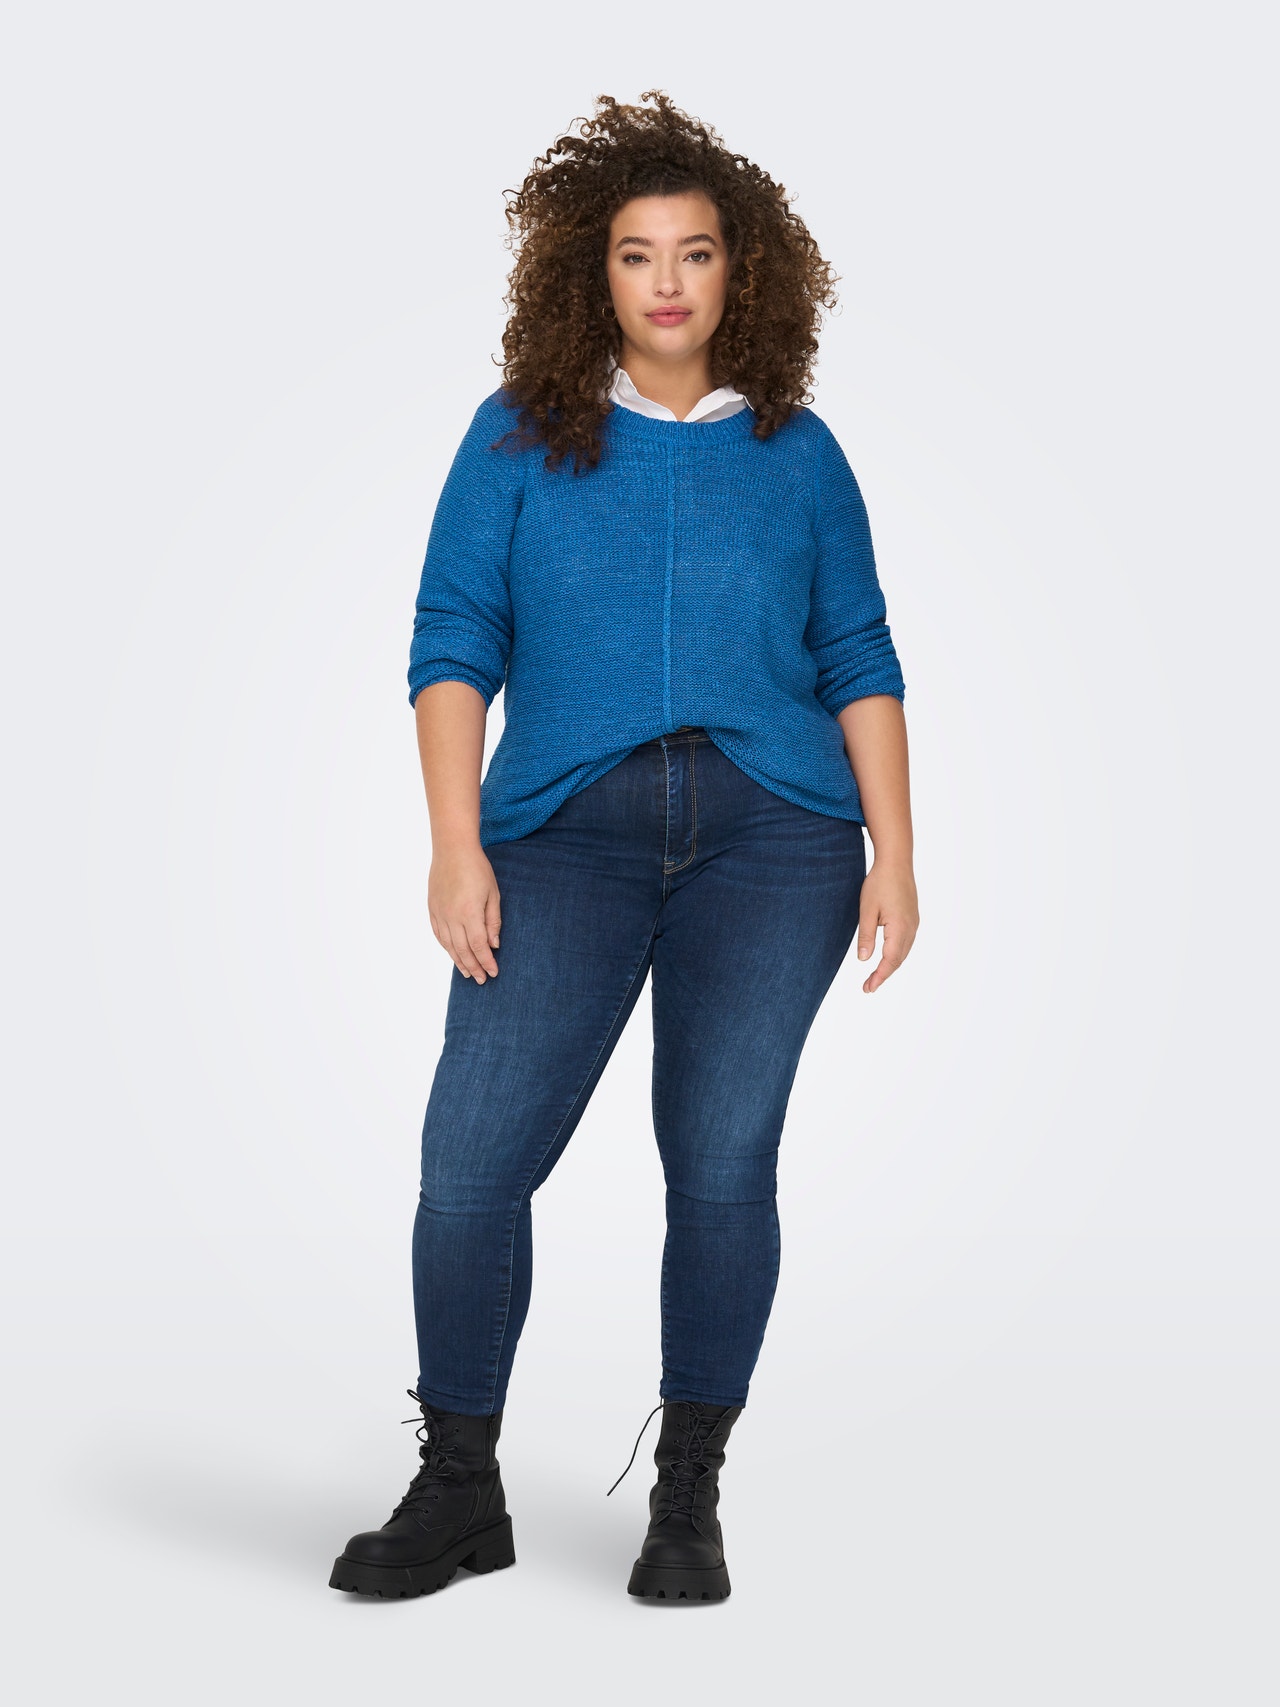 ONLY O-hals Curve Pullover -Directoire Blue - 15194438